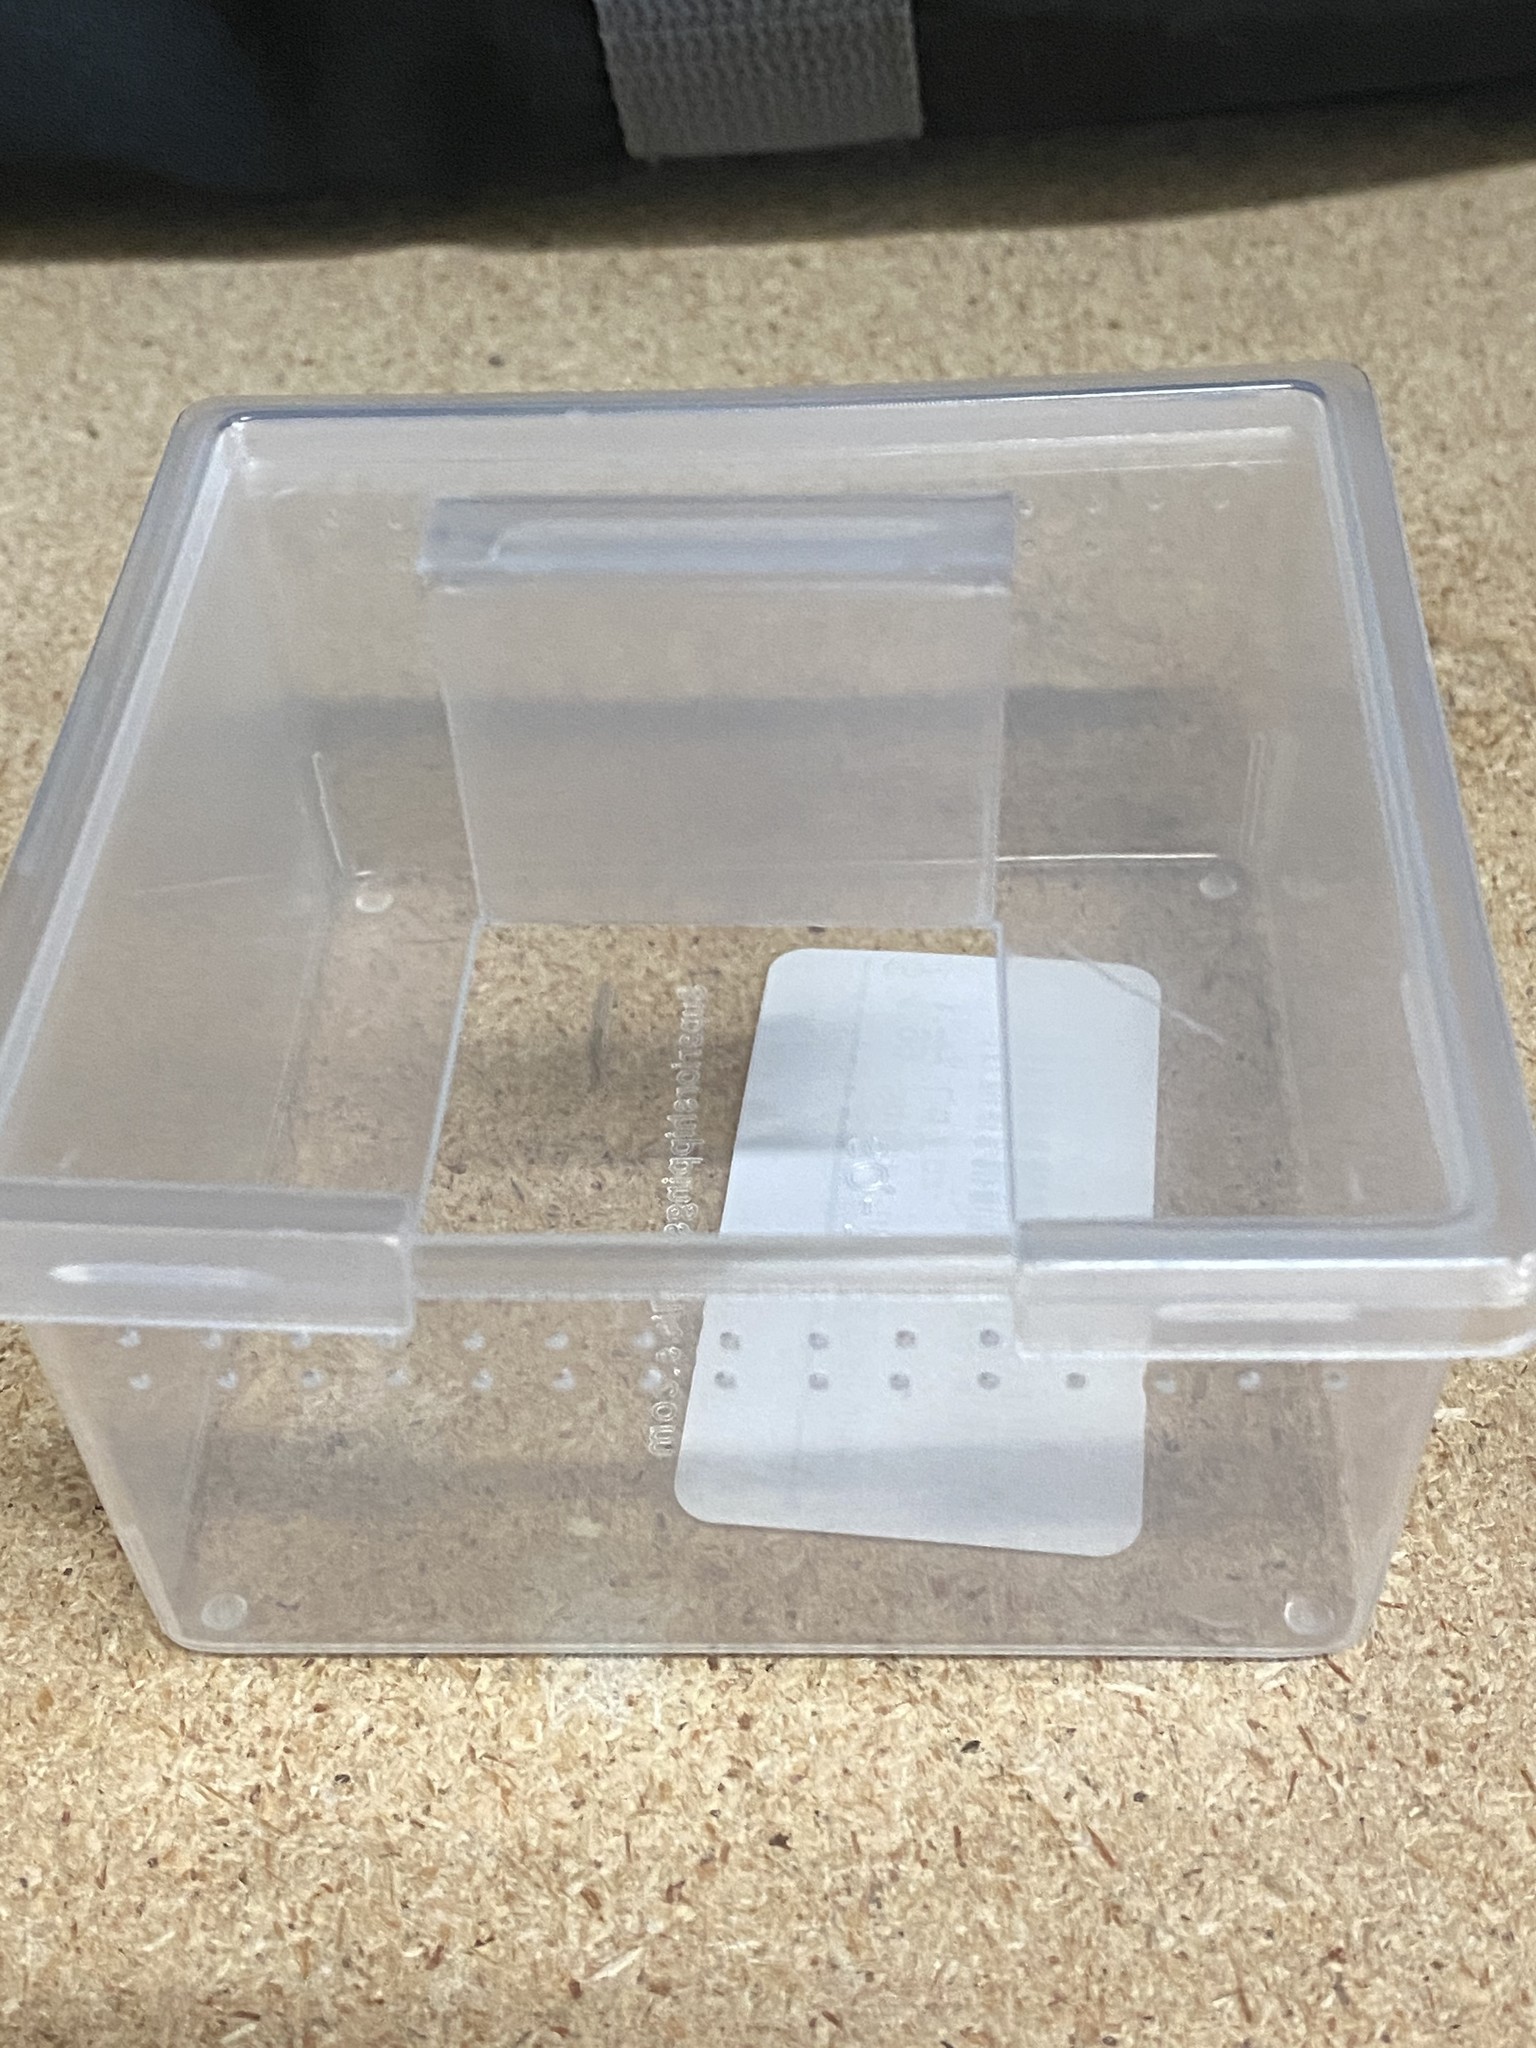 https://cdn.shoplightspeed.com/shops/635875/files/31786911/pro-kal-pro-kal-square-punched-deli-container-with.jpg